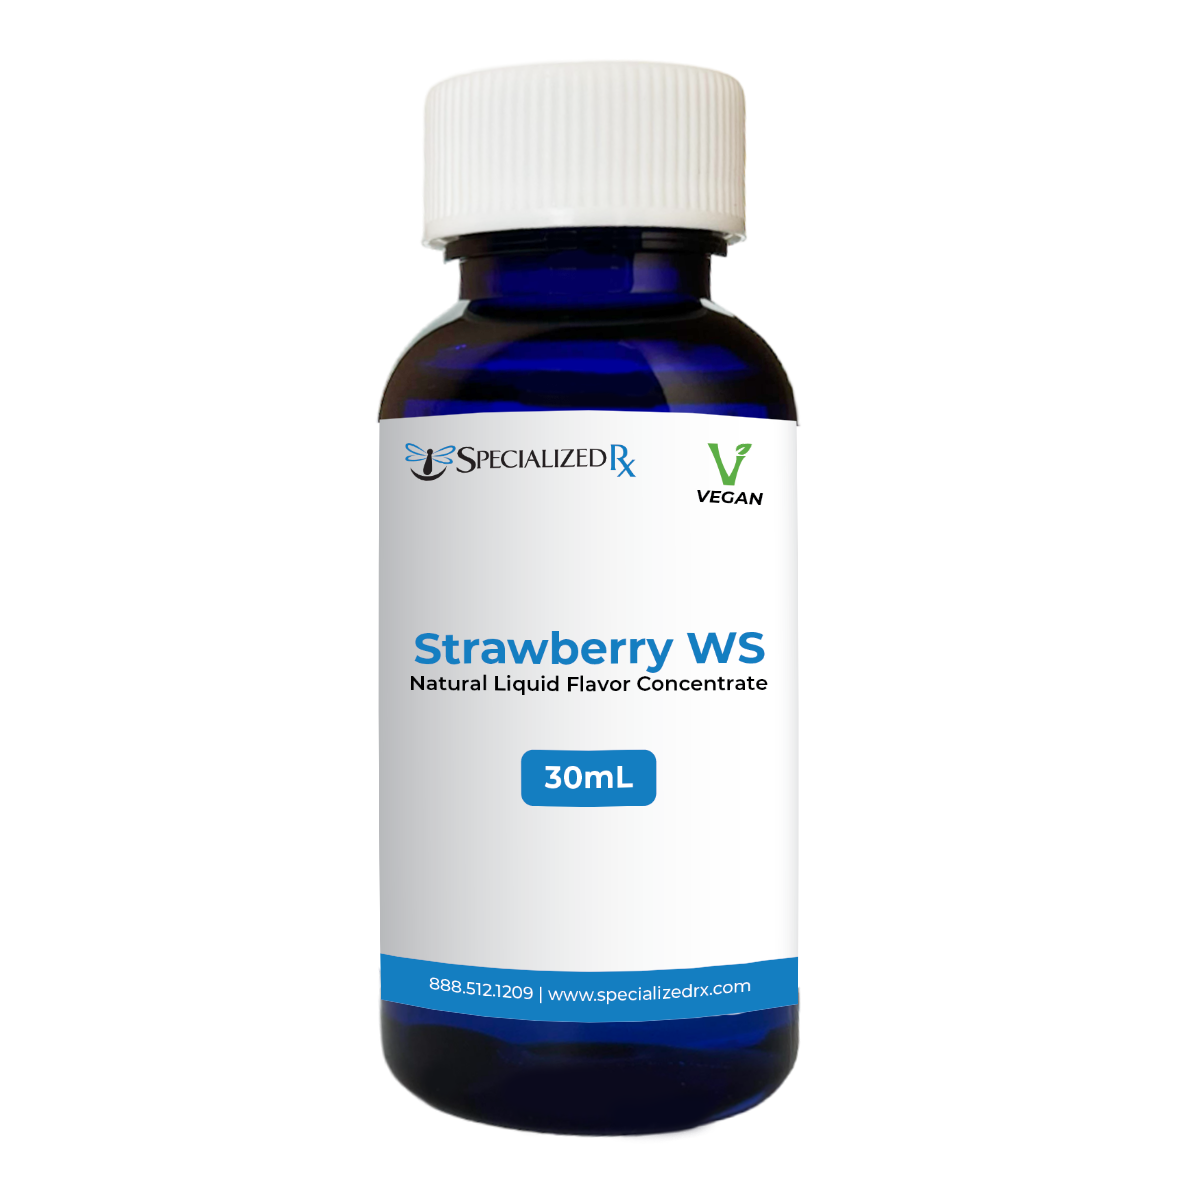 Strawberry WS Natural Liquid Flavor Concentrate